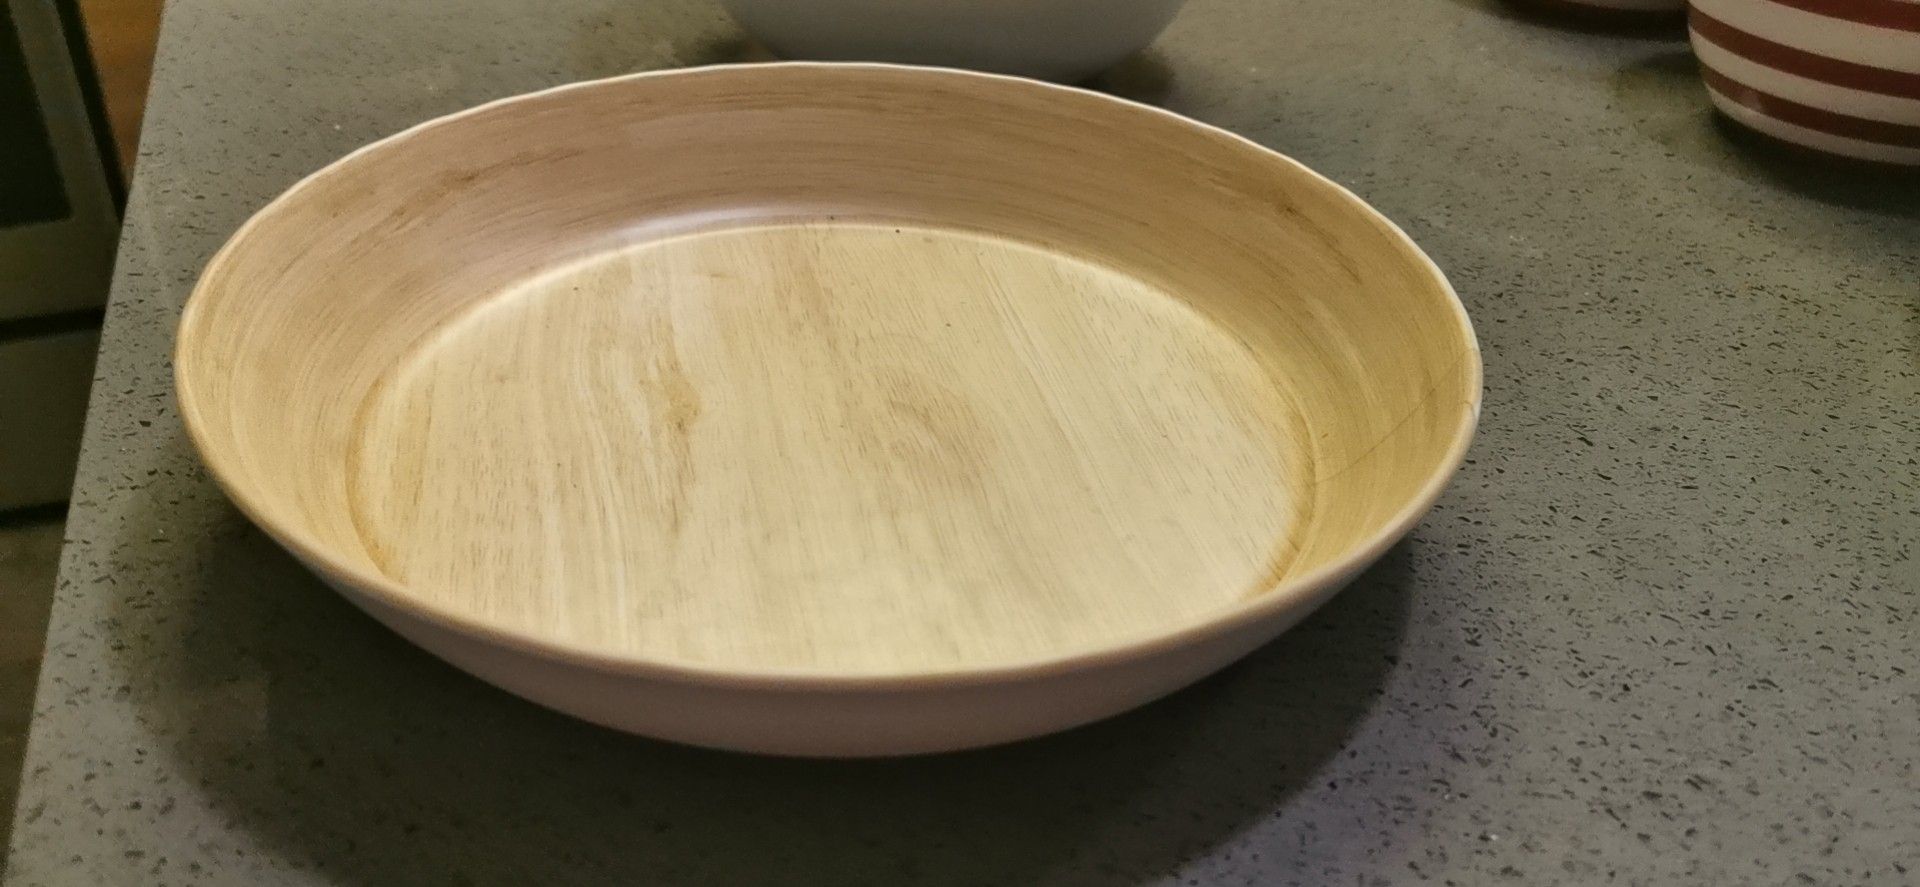 set of 3！！！Brand New Bamboo Plate Set 